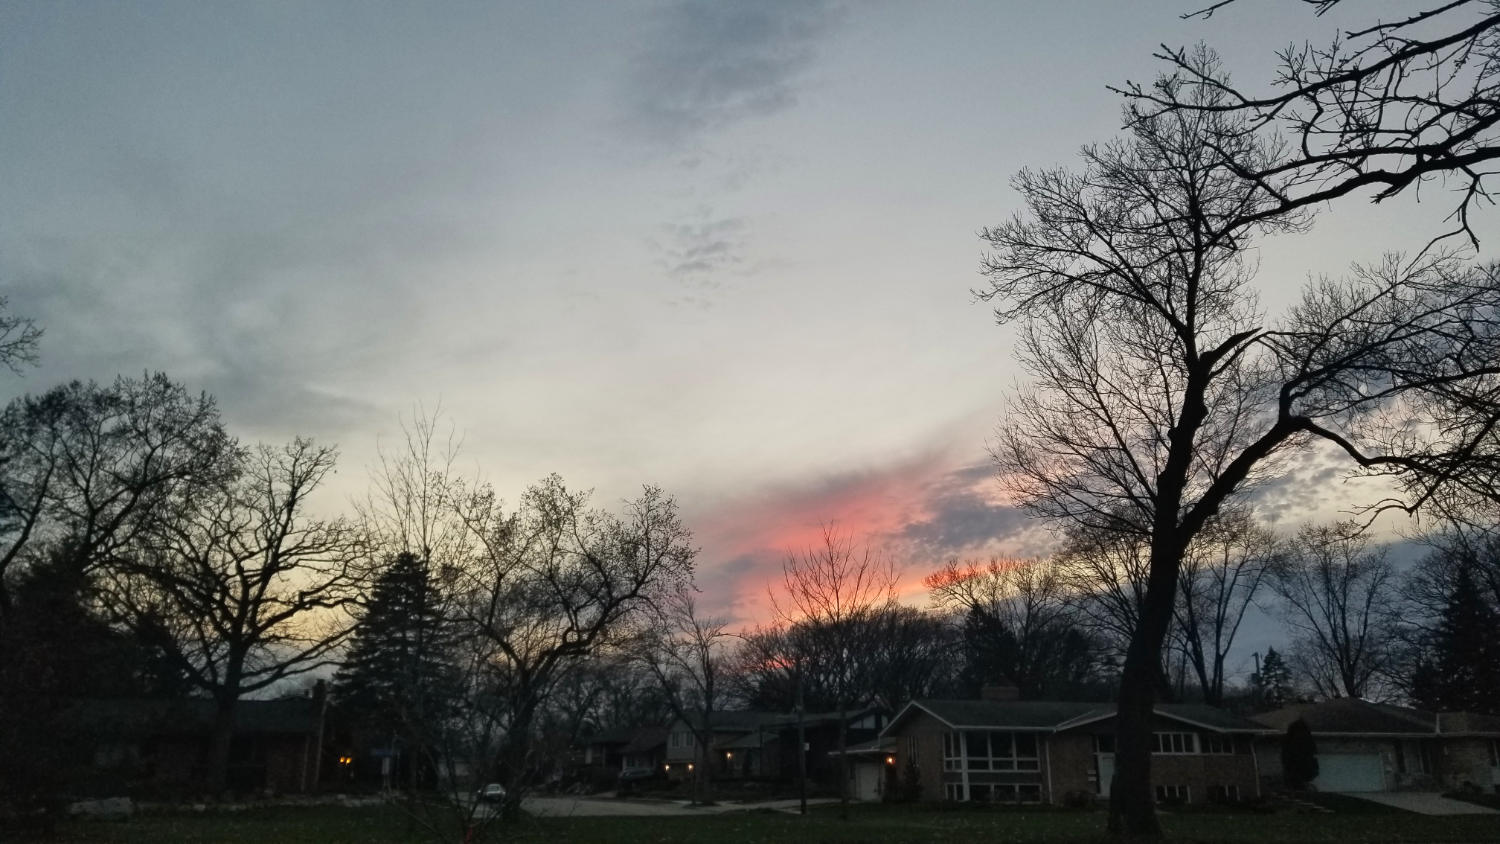 Pale orange sunset sky with clouds over dark houses and trees